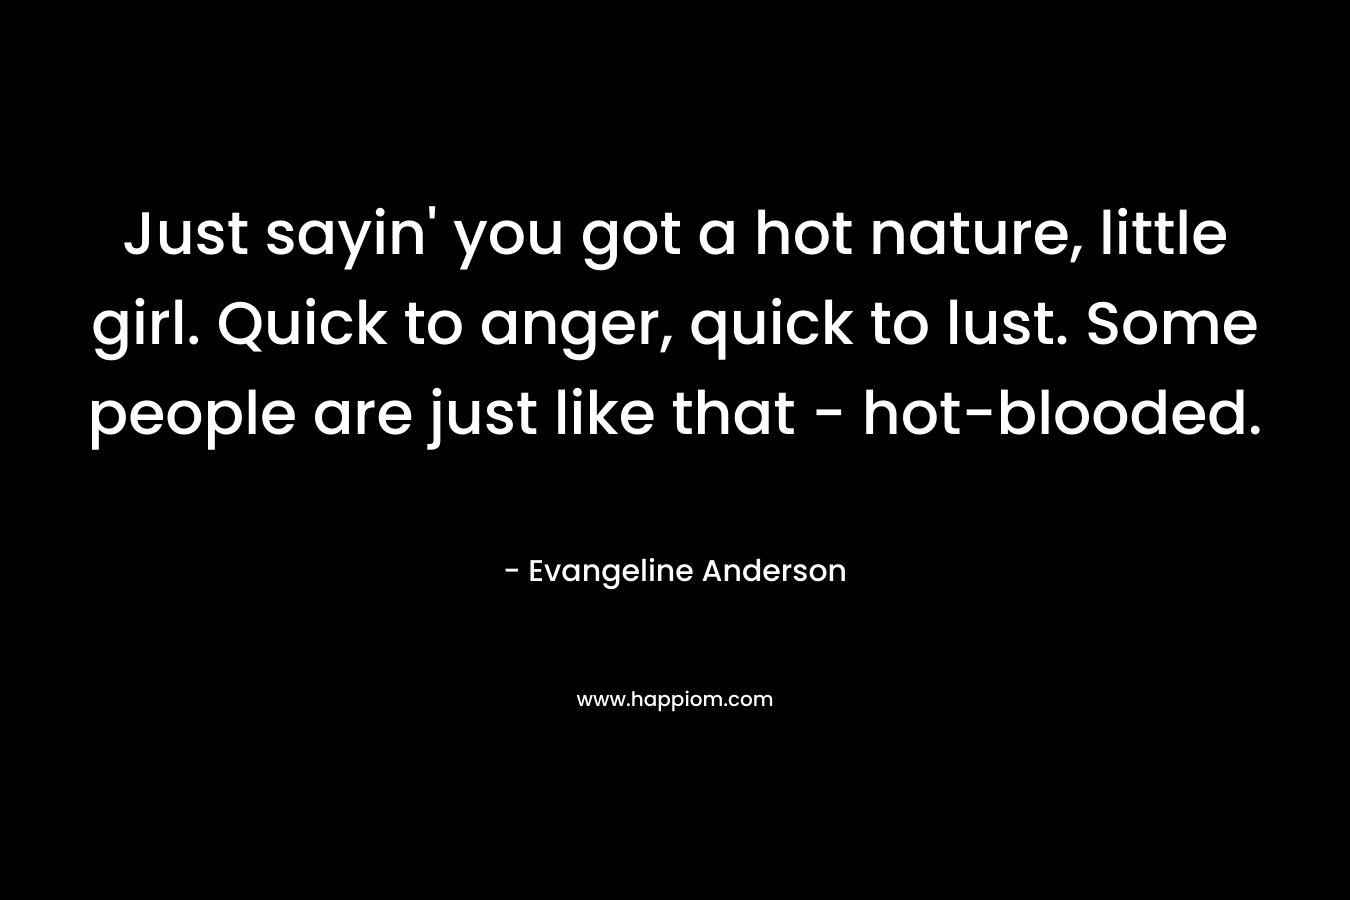 Just sayin’ you got a hot nature, little girl. Quick to anger, quick to lust. Some people are just like that – hot-blooded. – Evangeline Anderson